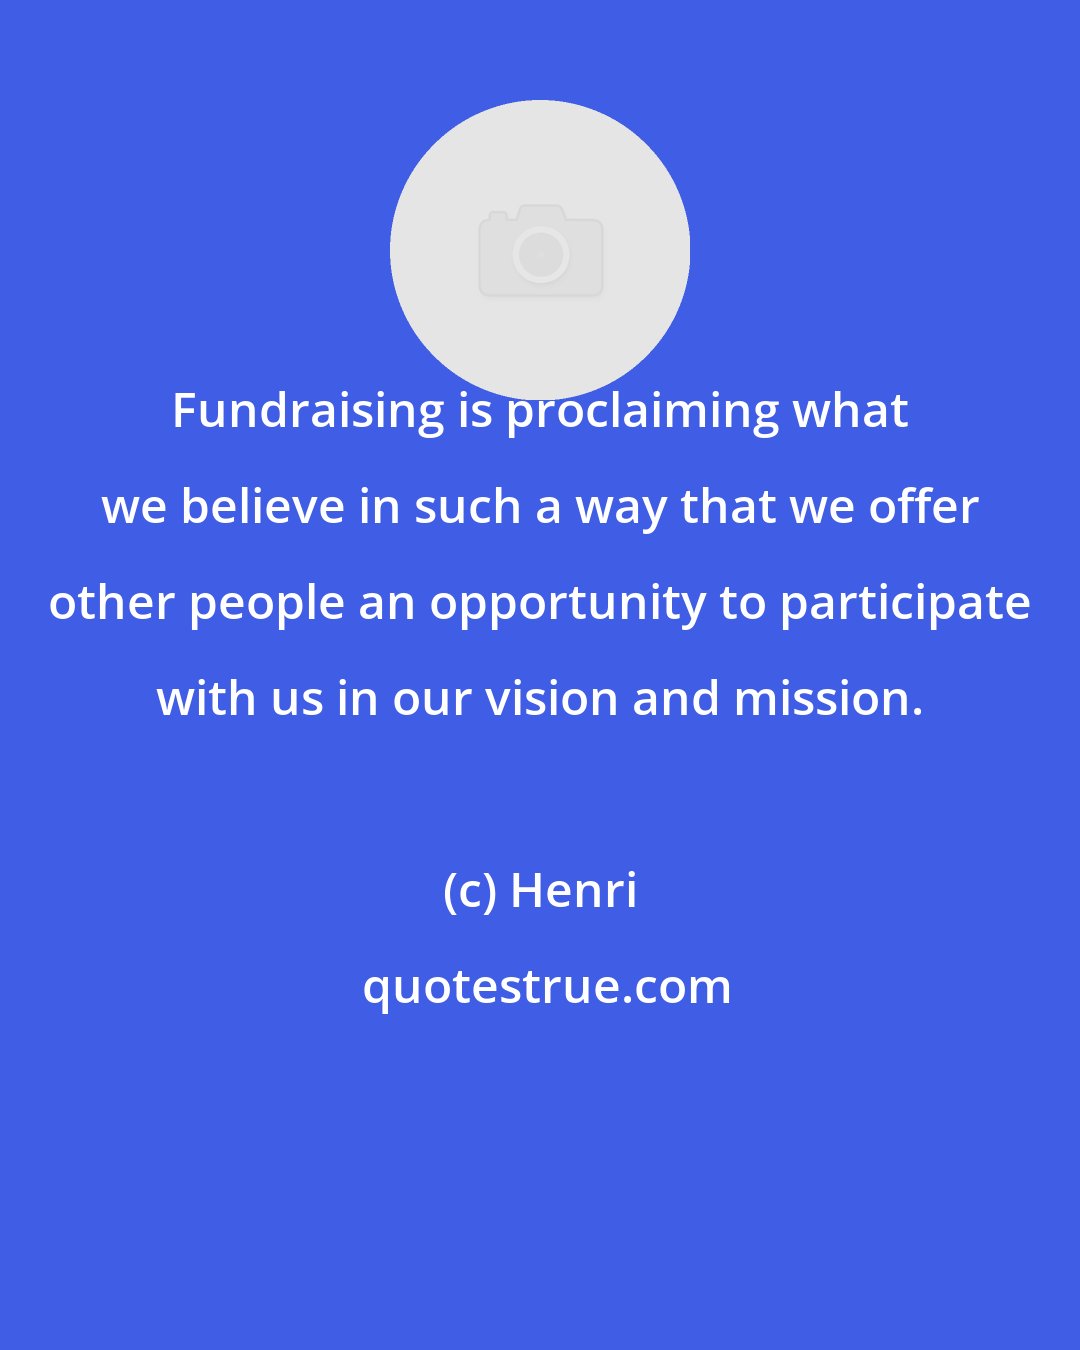 Henri: Fundraising is proclaiming what we believe in such a way that we offer other people an opportunity to participate with us in our vision and mission.